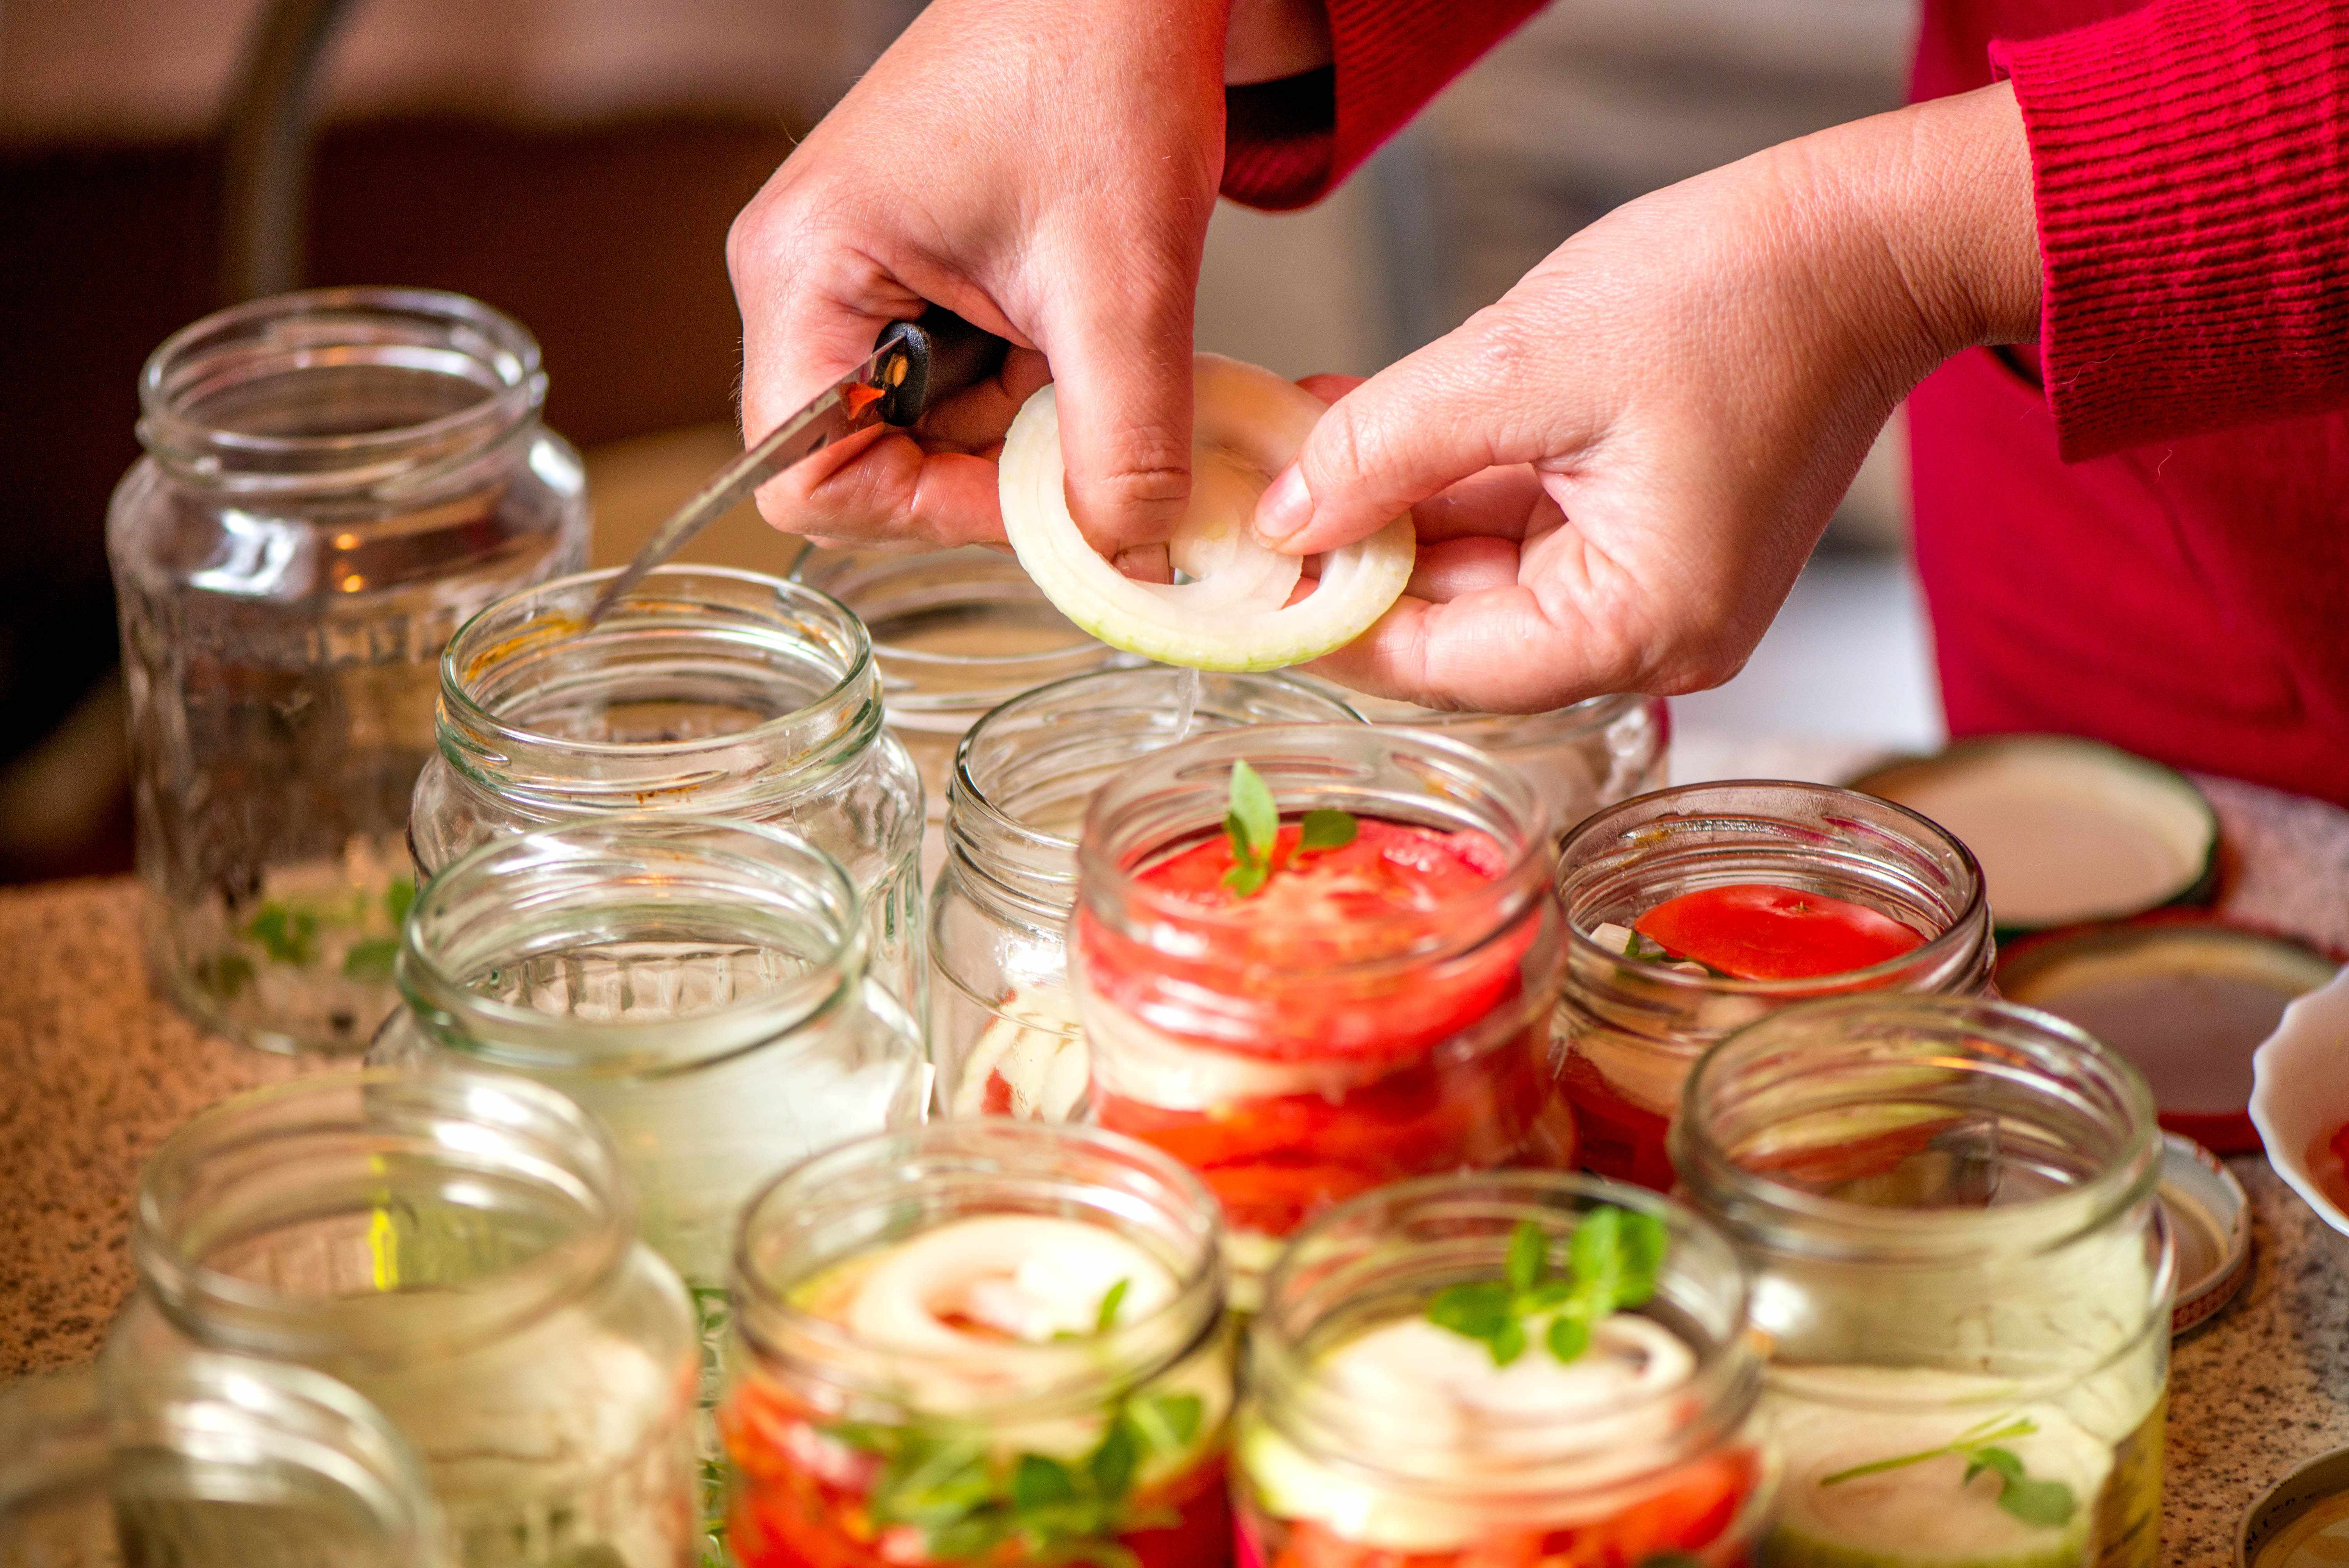 a person canning vegetables in jars